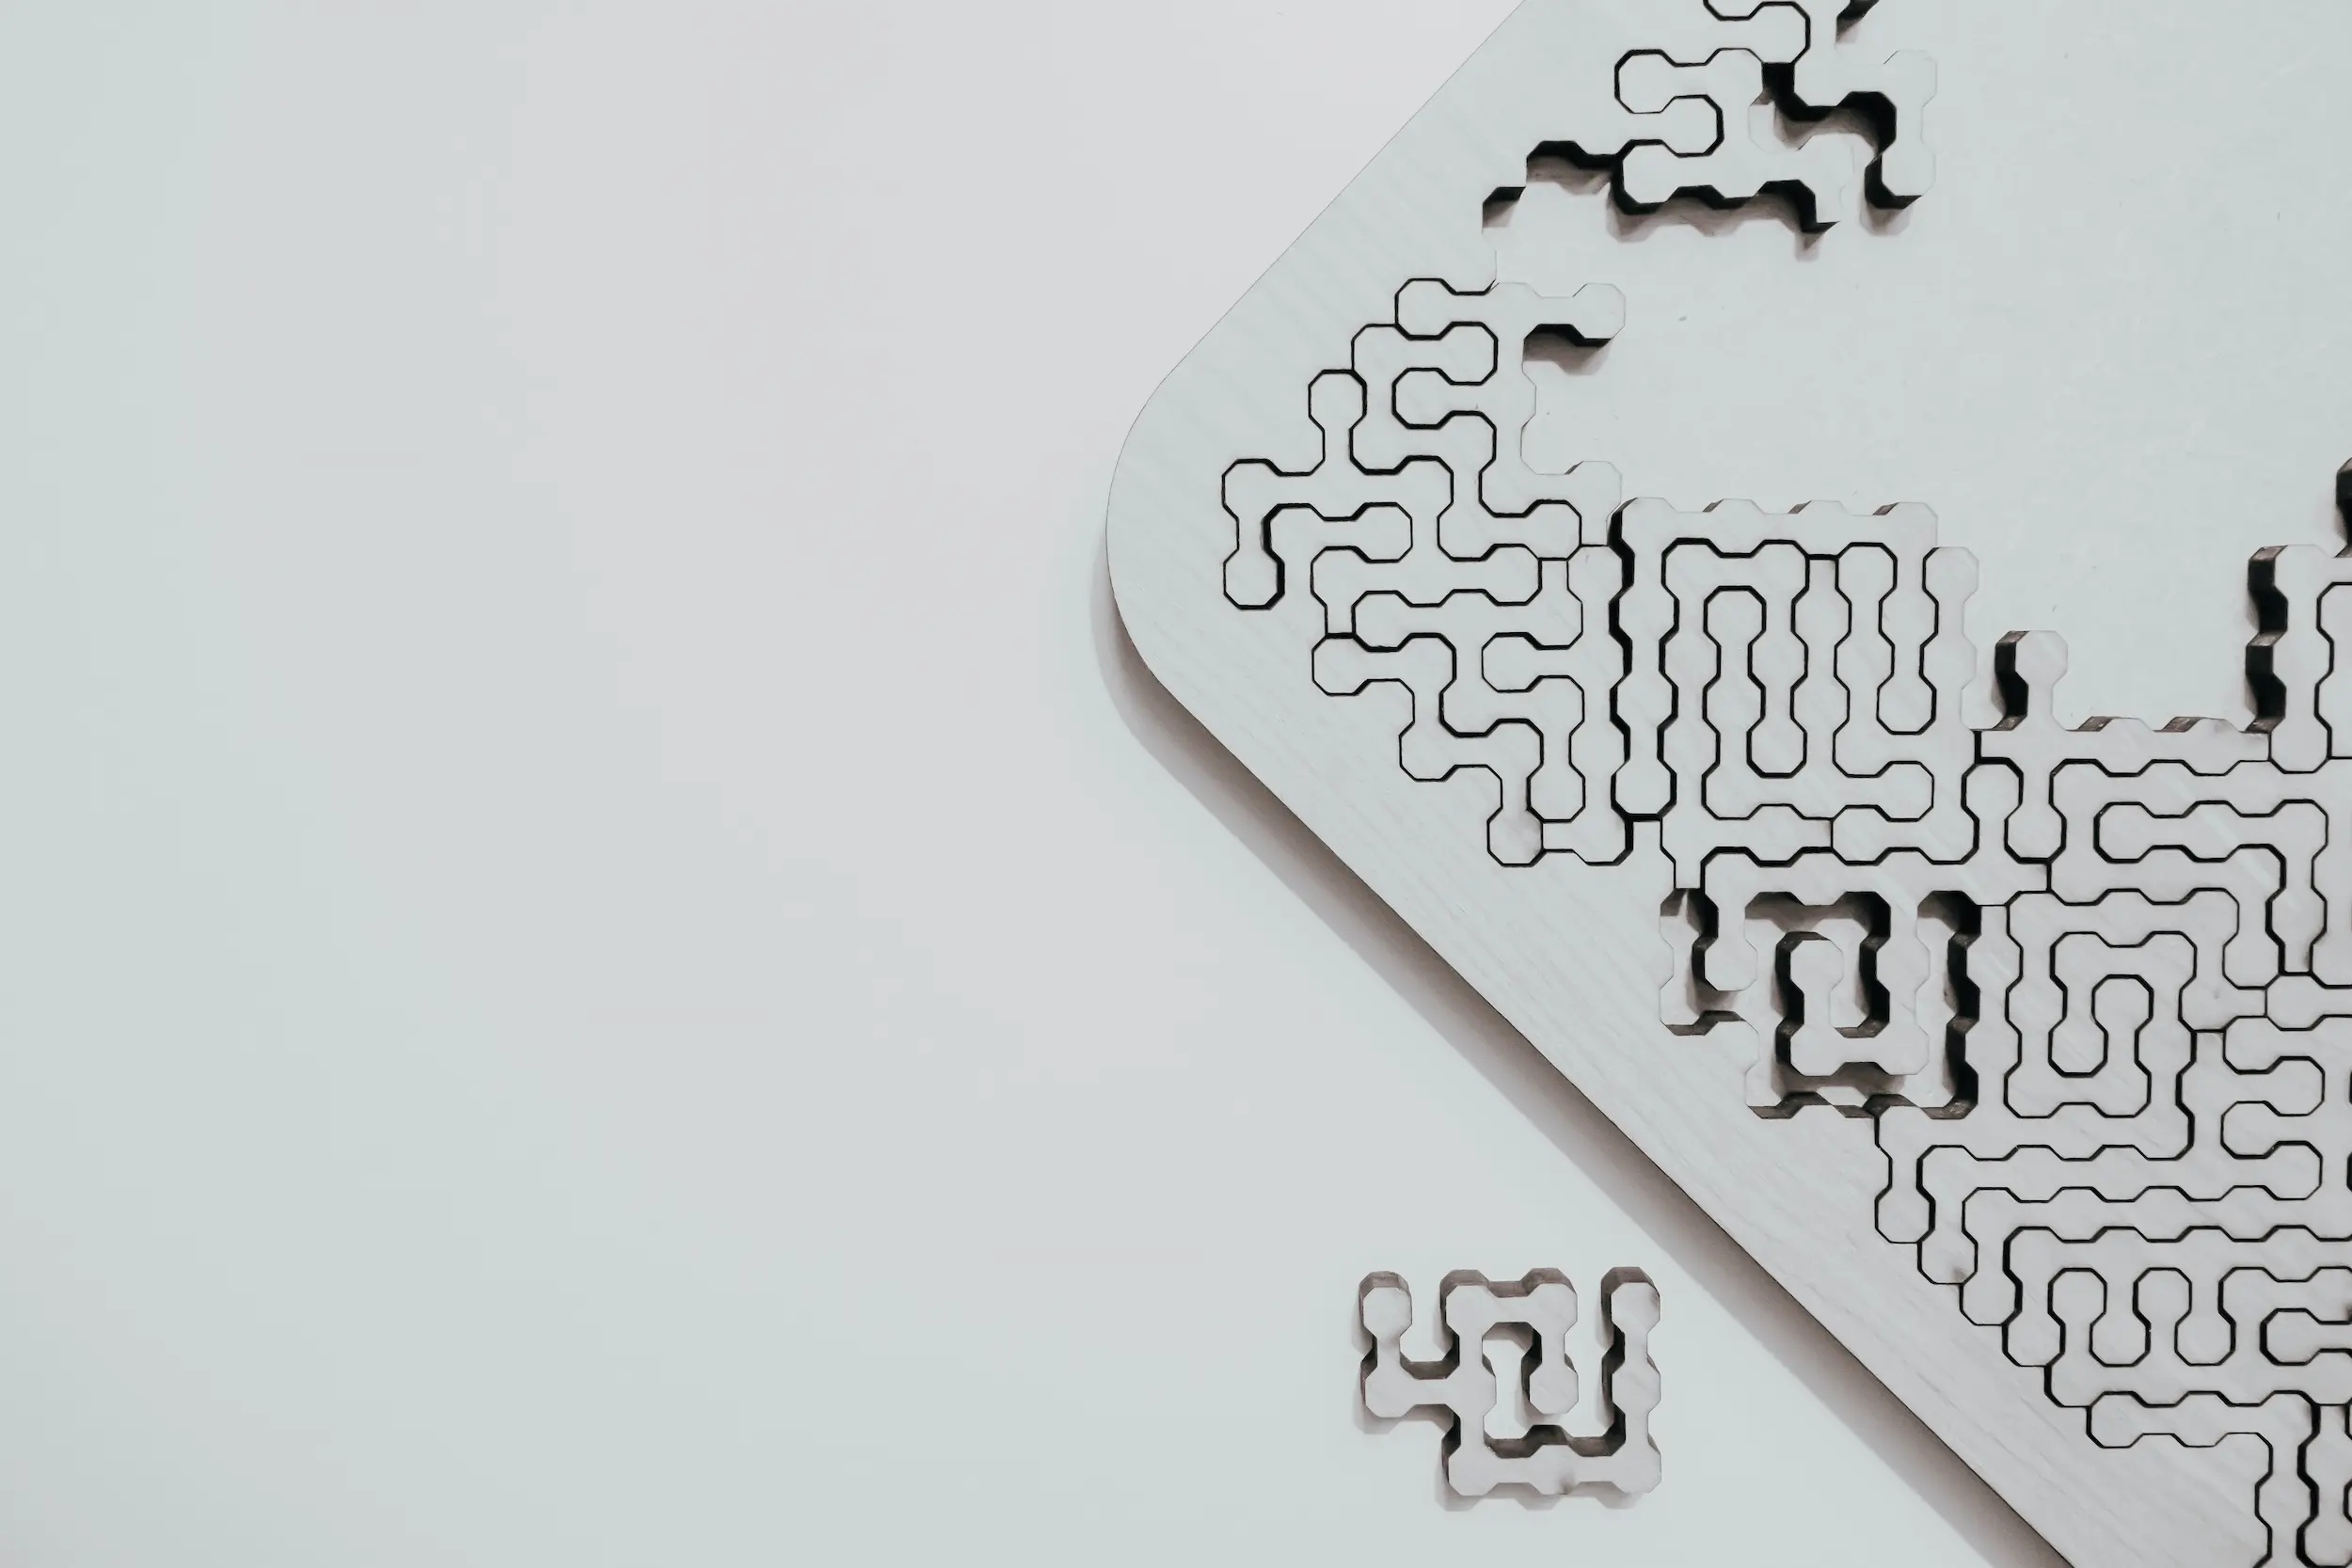 Photo of a jigsaw puzzle with shapes in complicated patterns